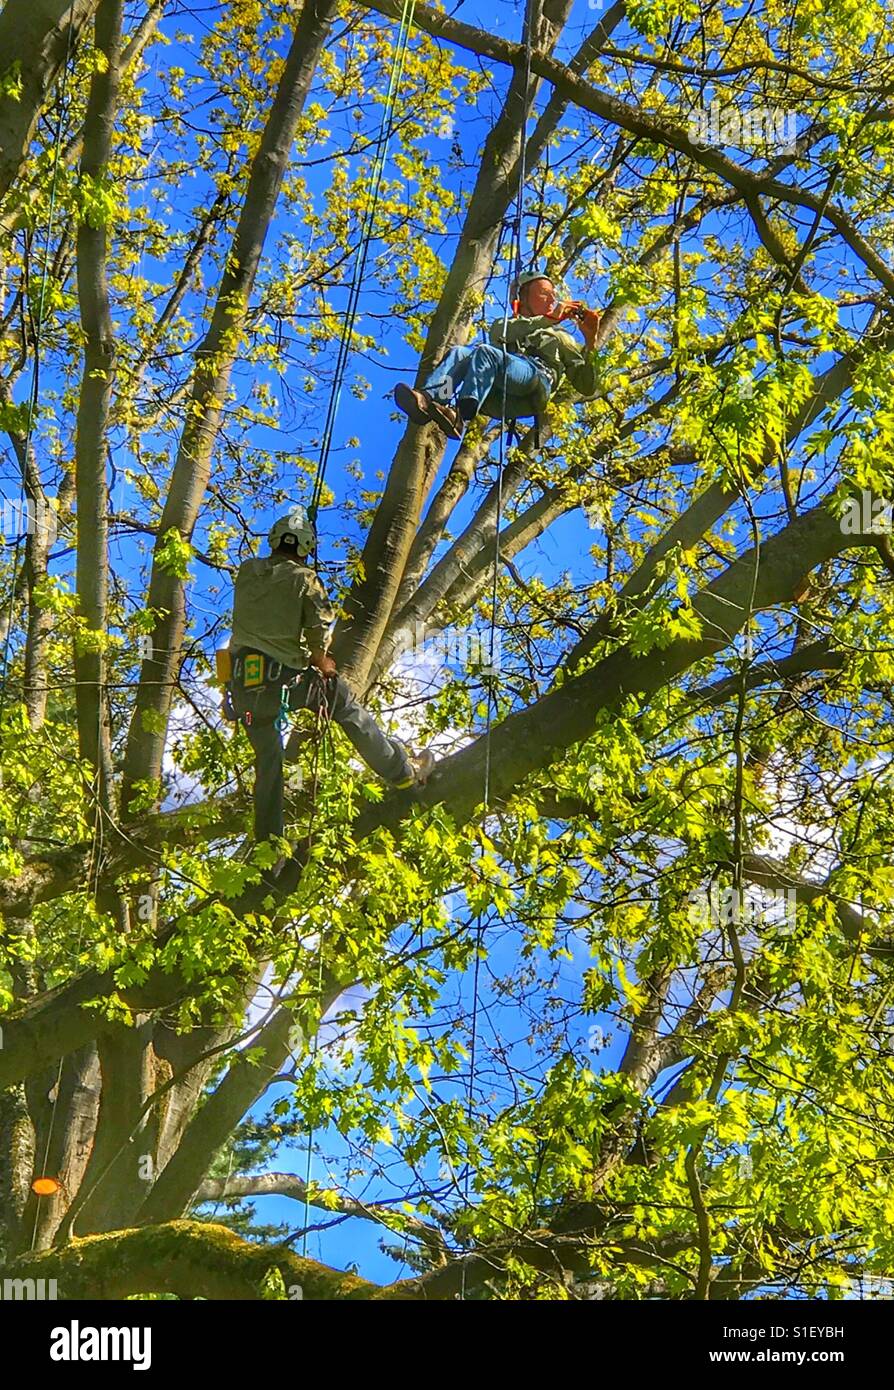 Men climbing in a tree with ropes Stock Photo